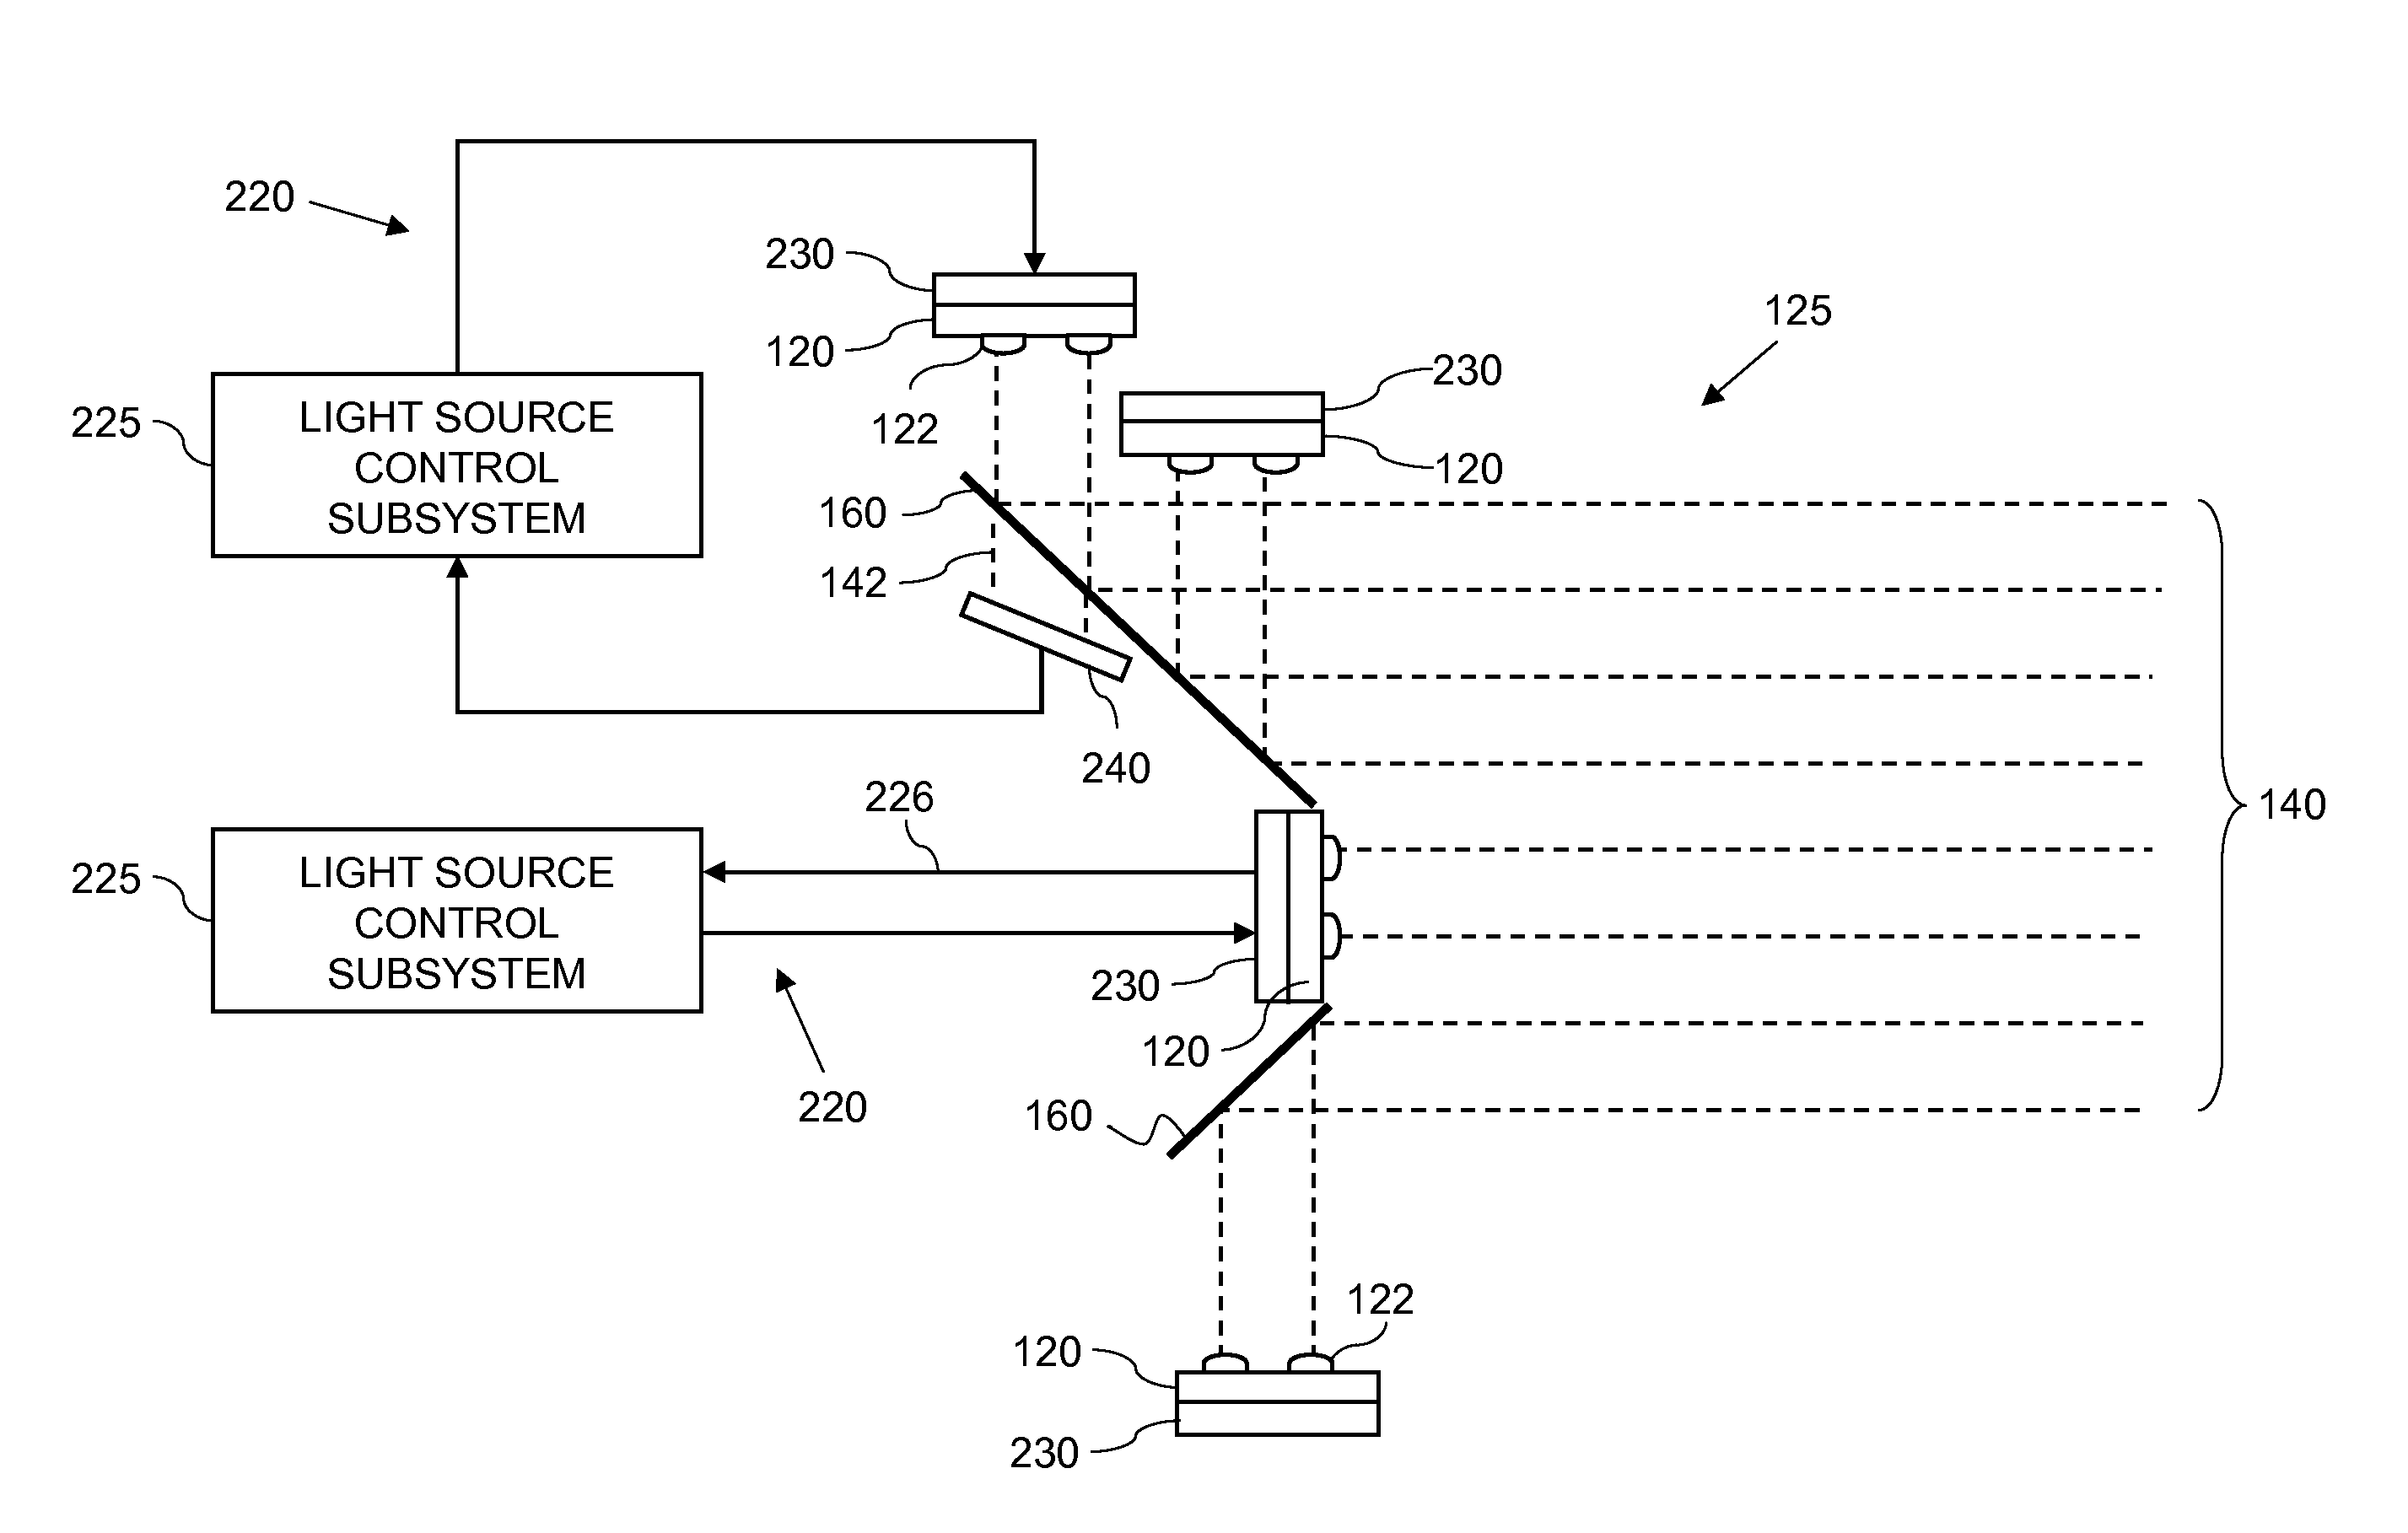 Light source control for projector with multiple pulse-width modulated light sources